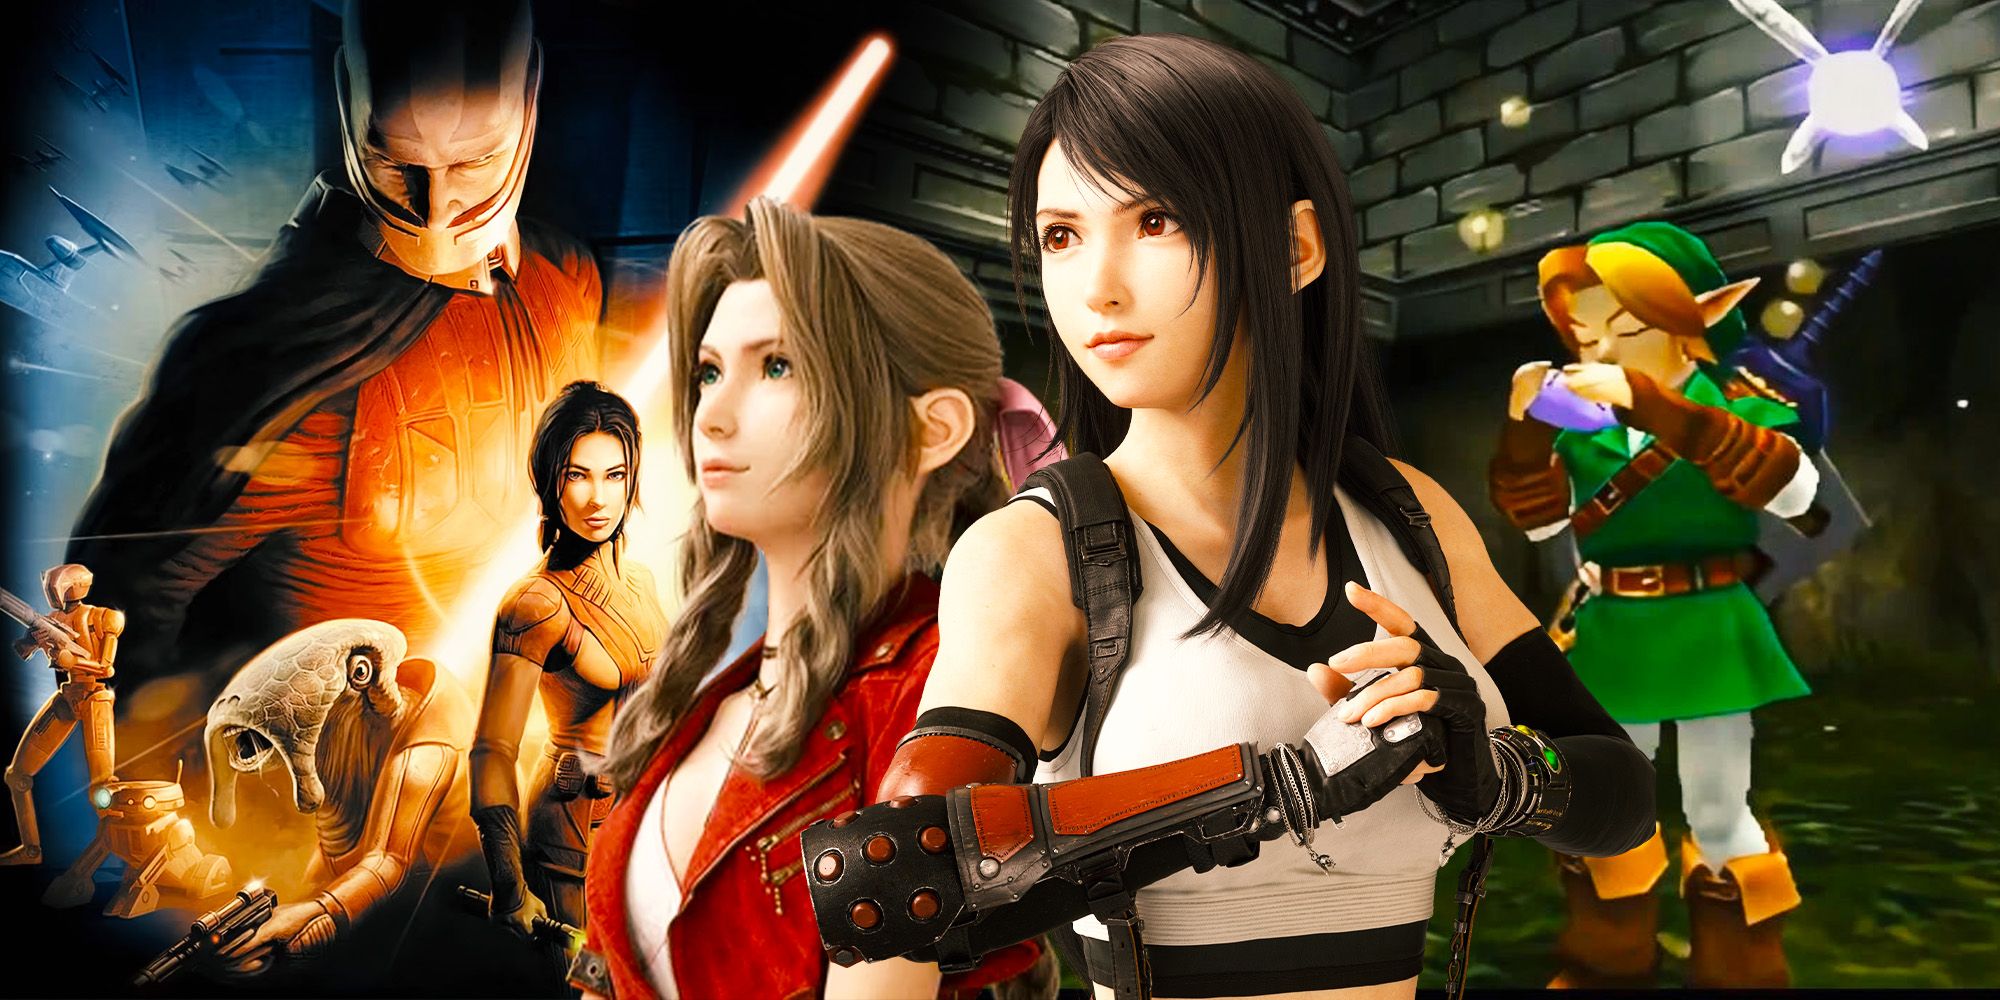 Tifa and Aerith from FF7 Rebirth with The Legend of Zelda Ocarina of Time and Star Wars Knights of the Old Republic